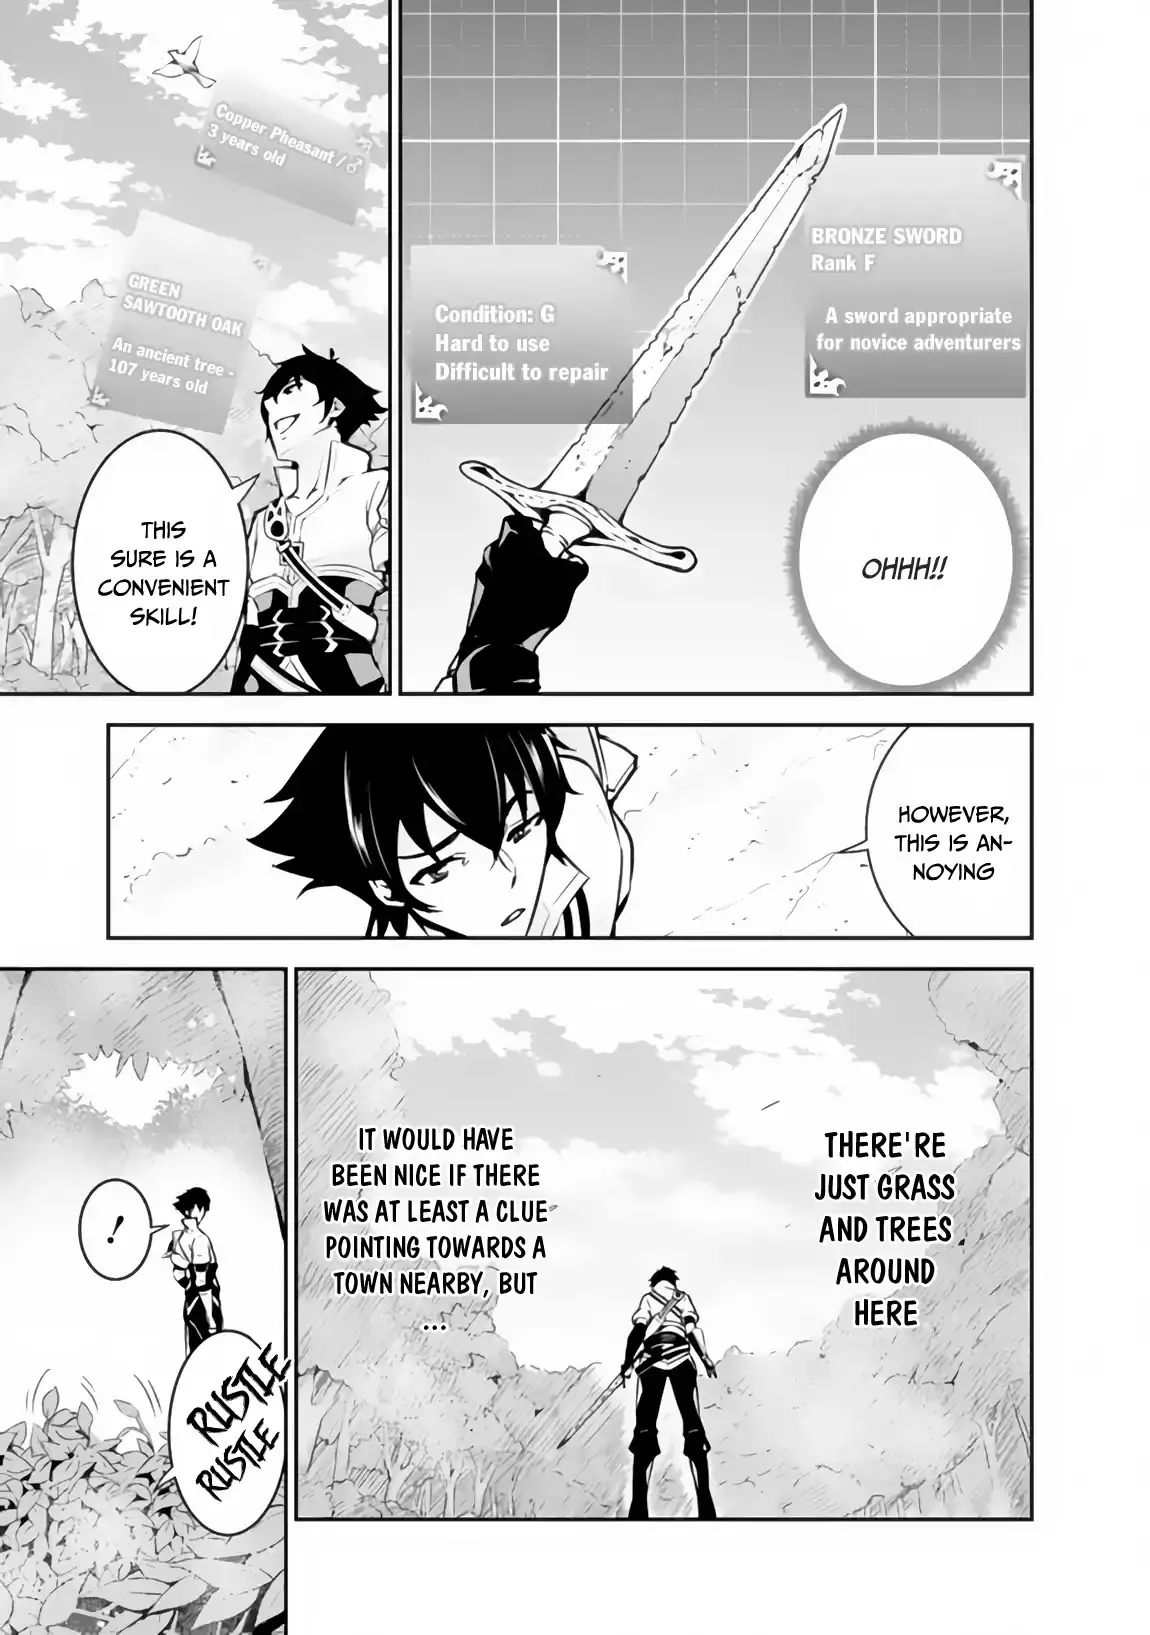 The Strongest Magical Swordsman Ever Reborn As An F-Rank Adventurer. - 2 page 6